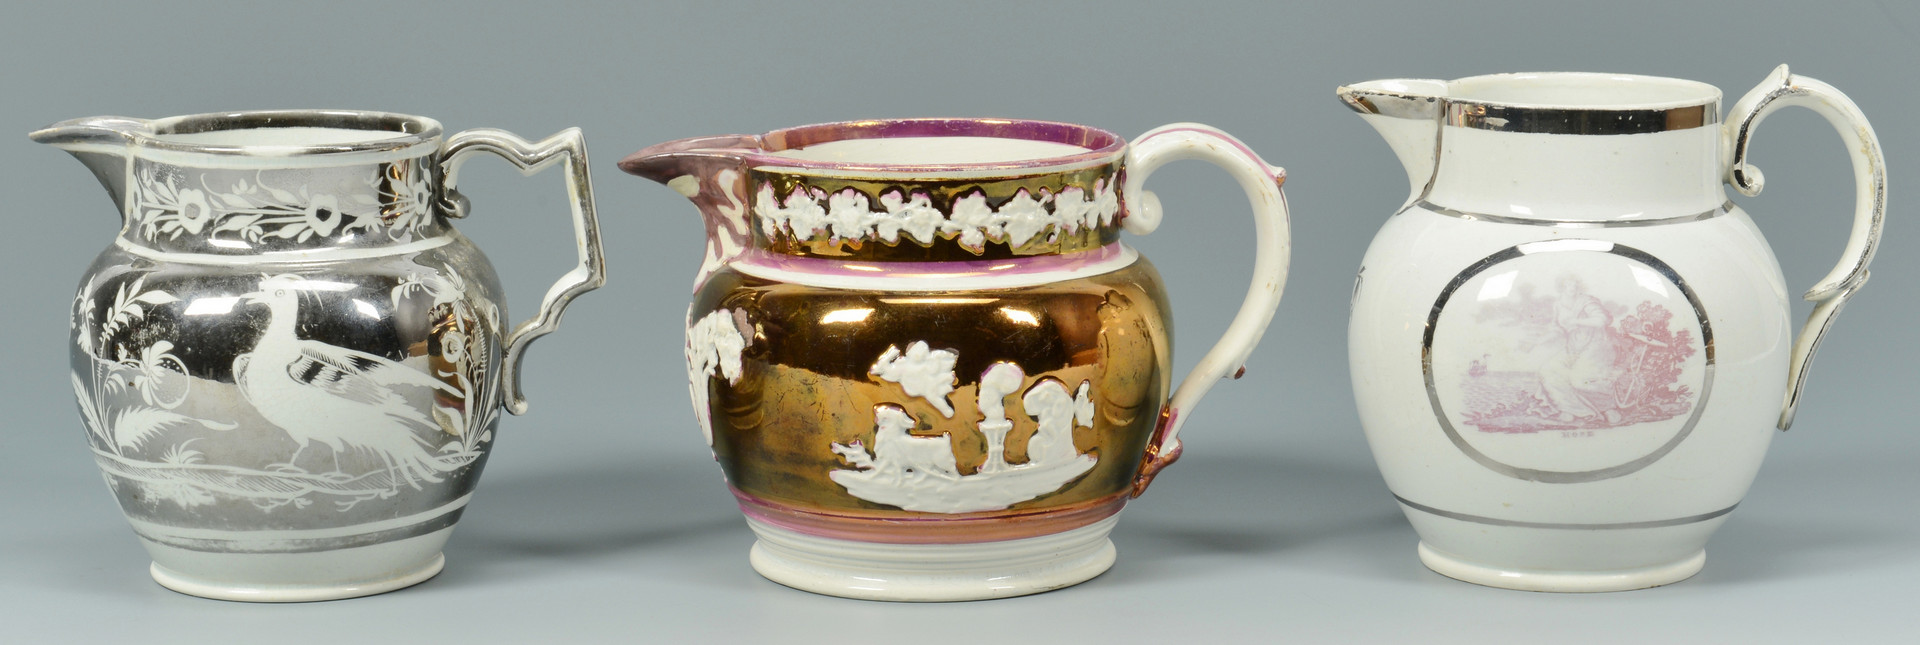 Lot 887: Six Silver and Pink Lusterware Pitchers